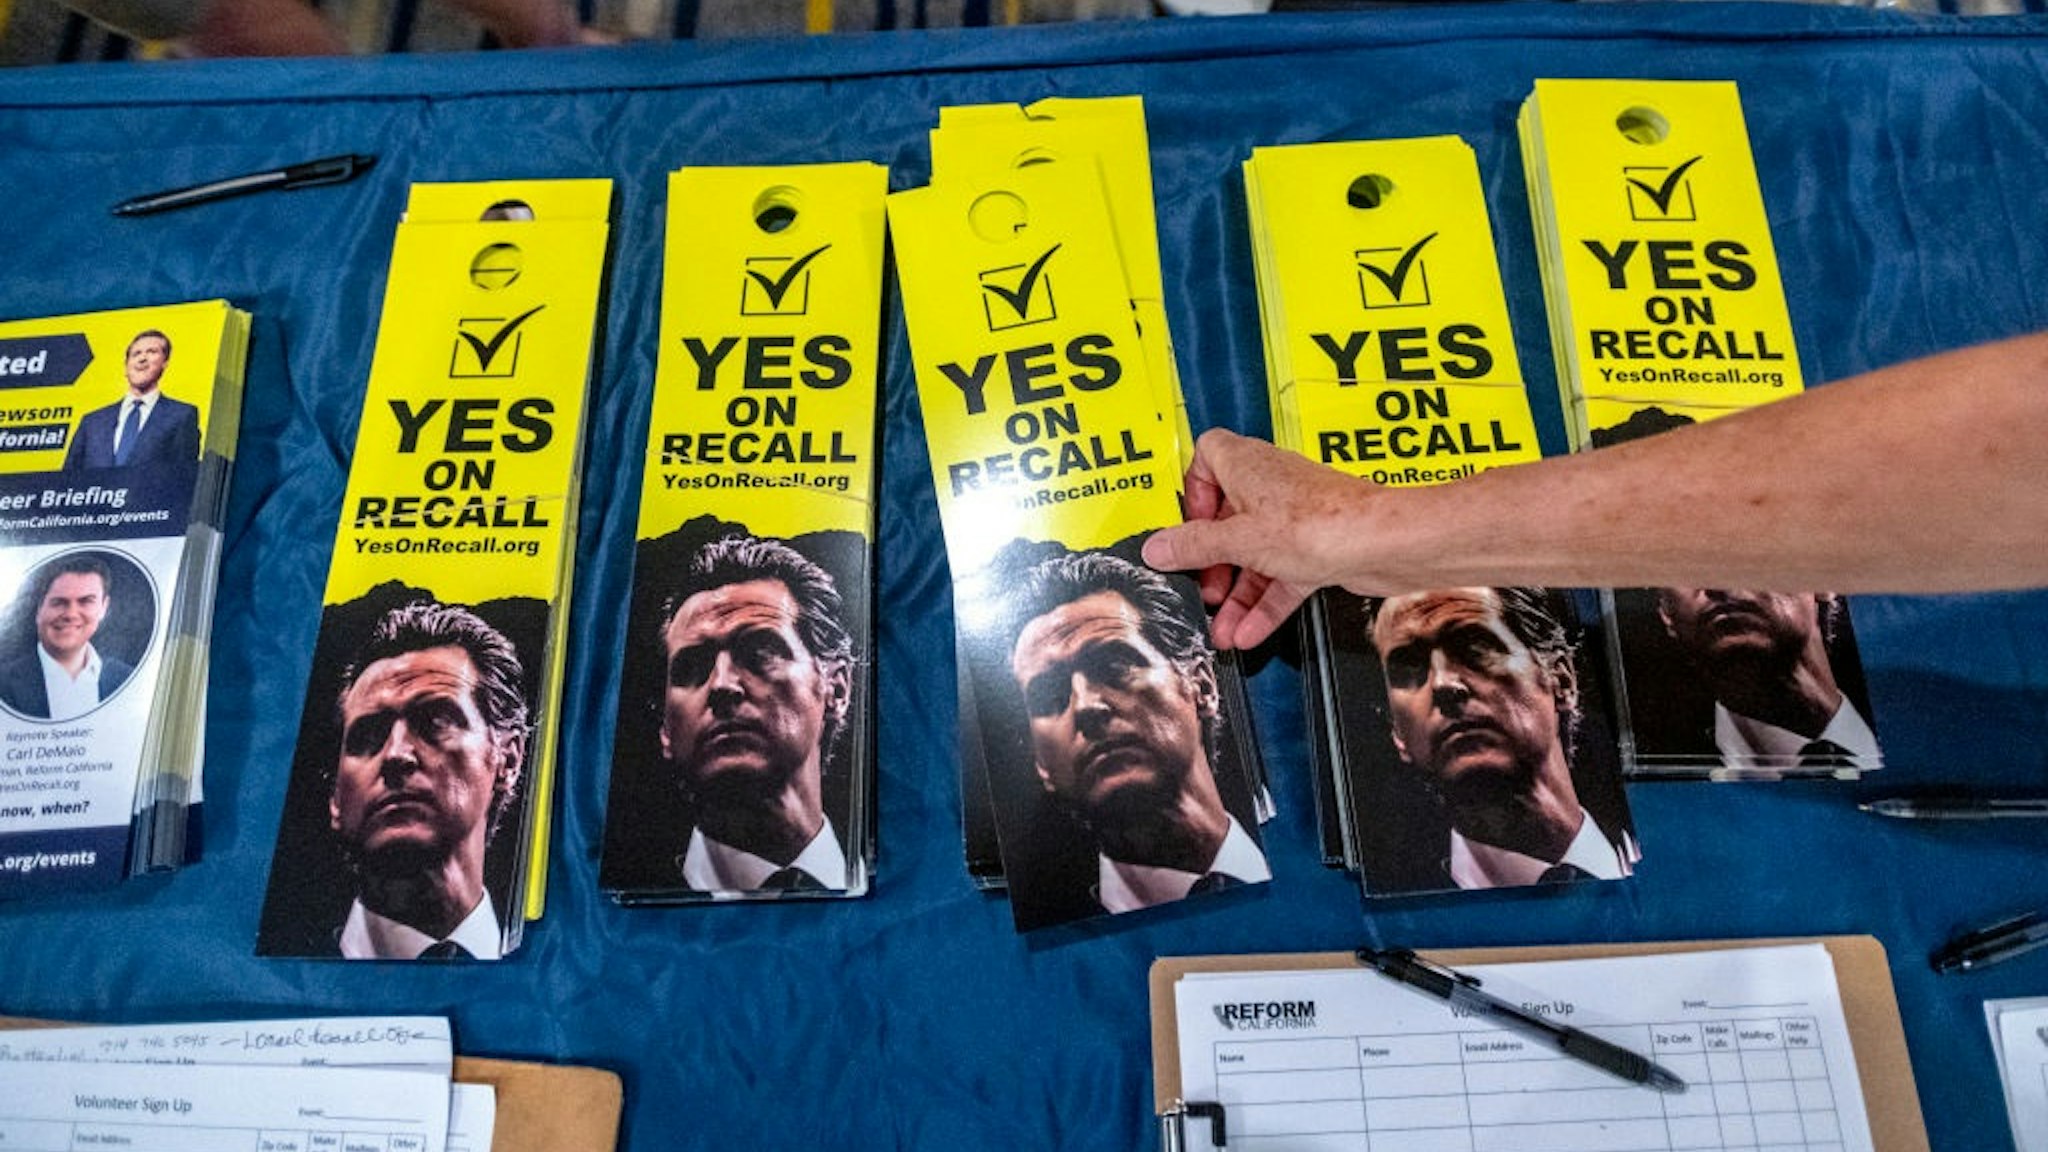 IRVINE, CA - JULY 31: A woman reaches for recall door hangers at a pro-recall rally at an Irvine hotel on Saturday, July 31, 2021, for the upcoming California Gubernatorial Recall Election against Governor Gavin Newsom to be held on September 14, 2021.